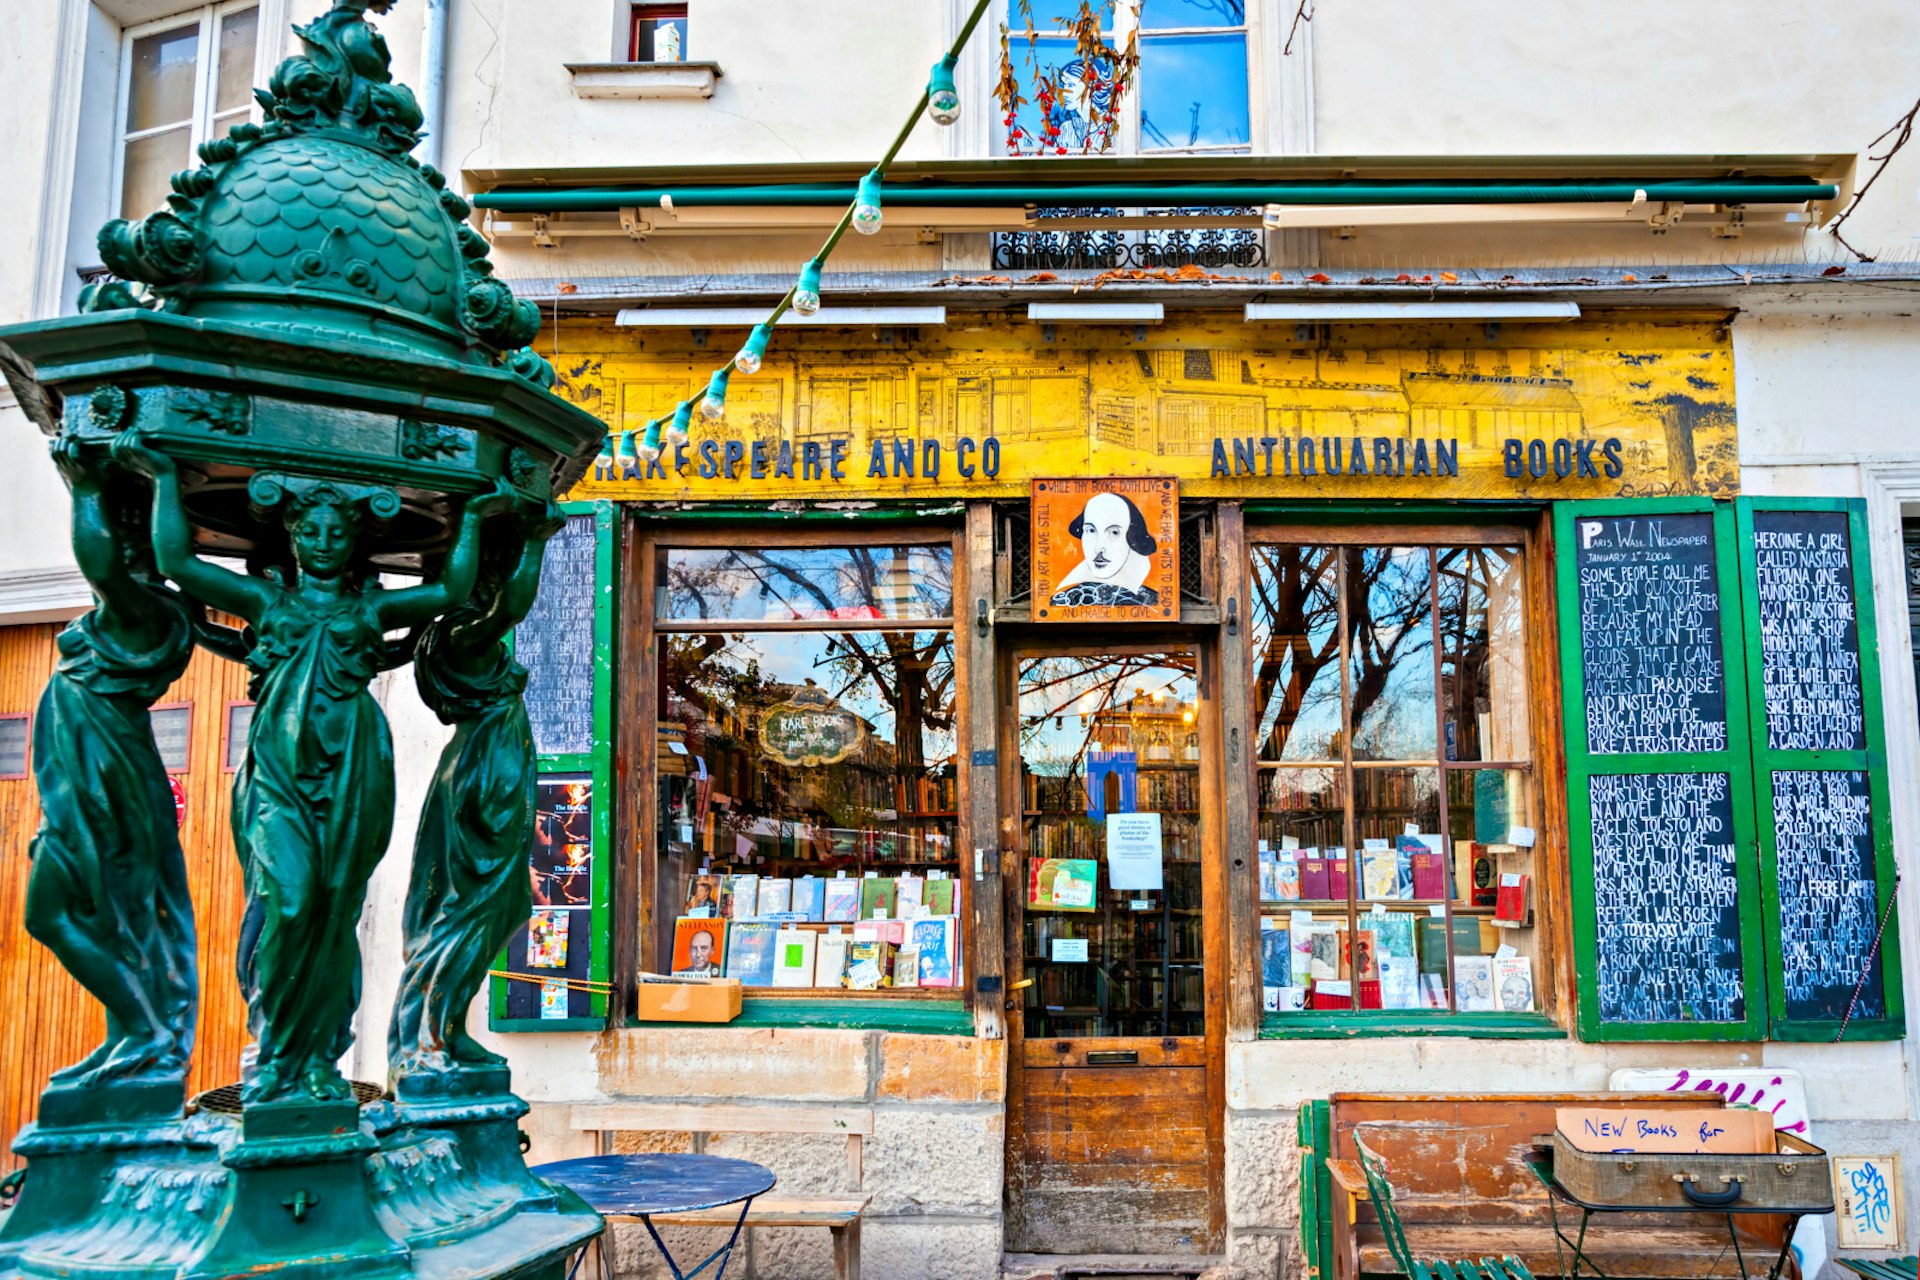 The Shakespeare and Co. bookstore in Paris, France